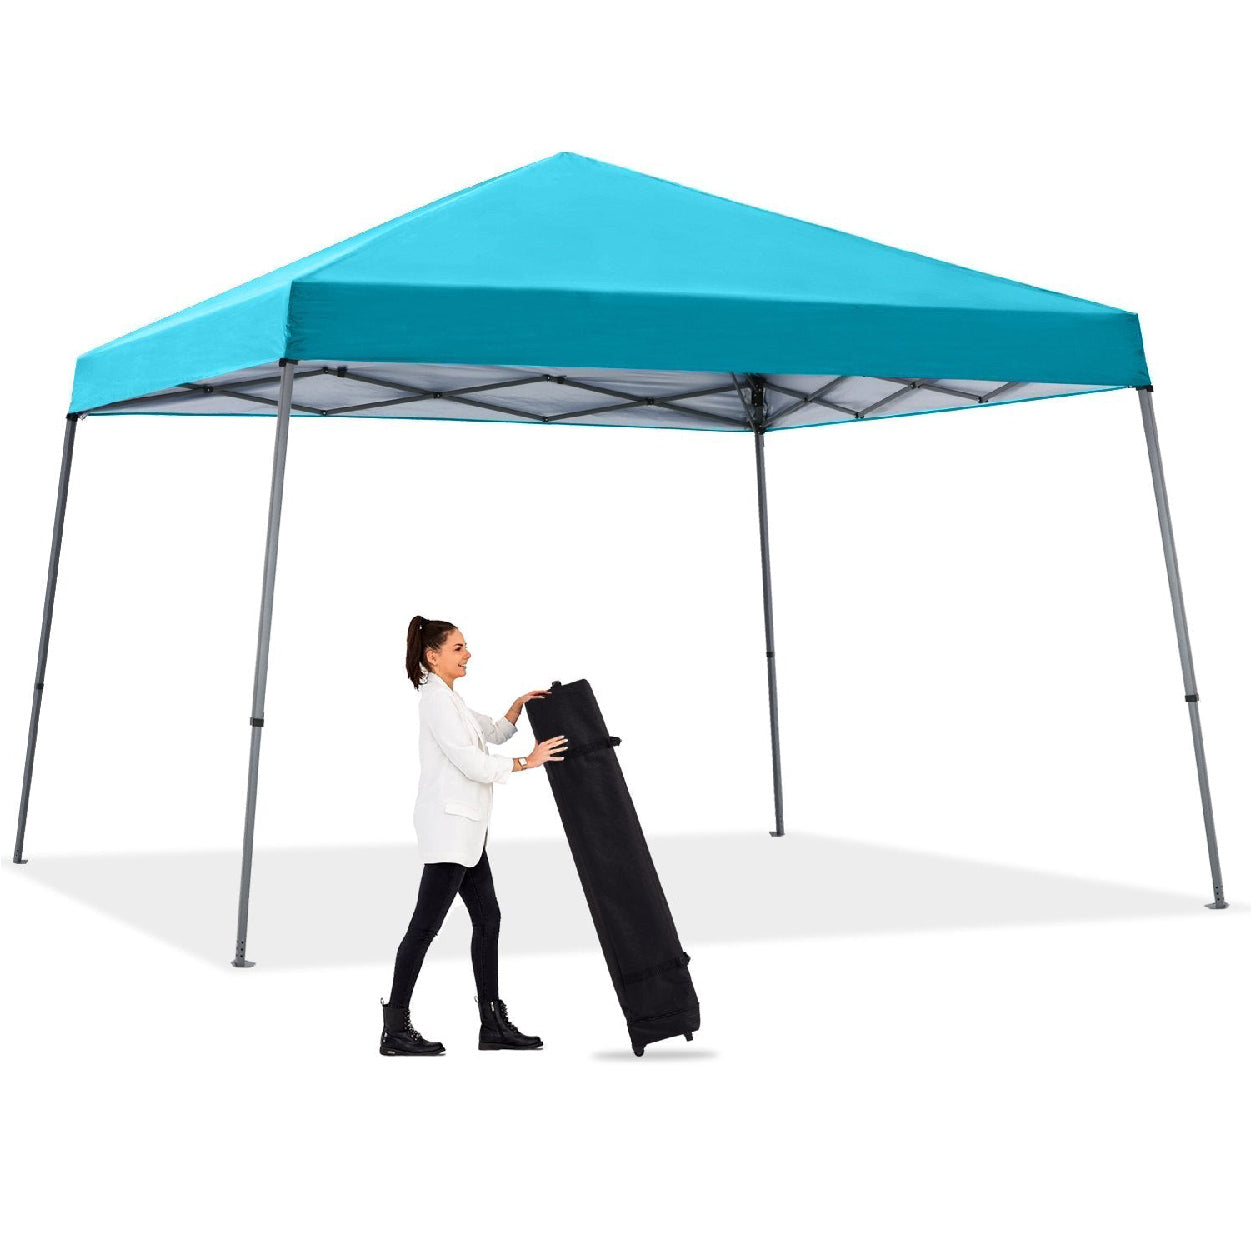 Stable Pop up Outdoor Canopy Tent